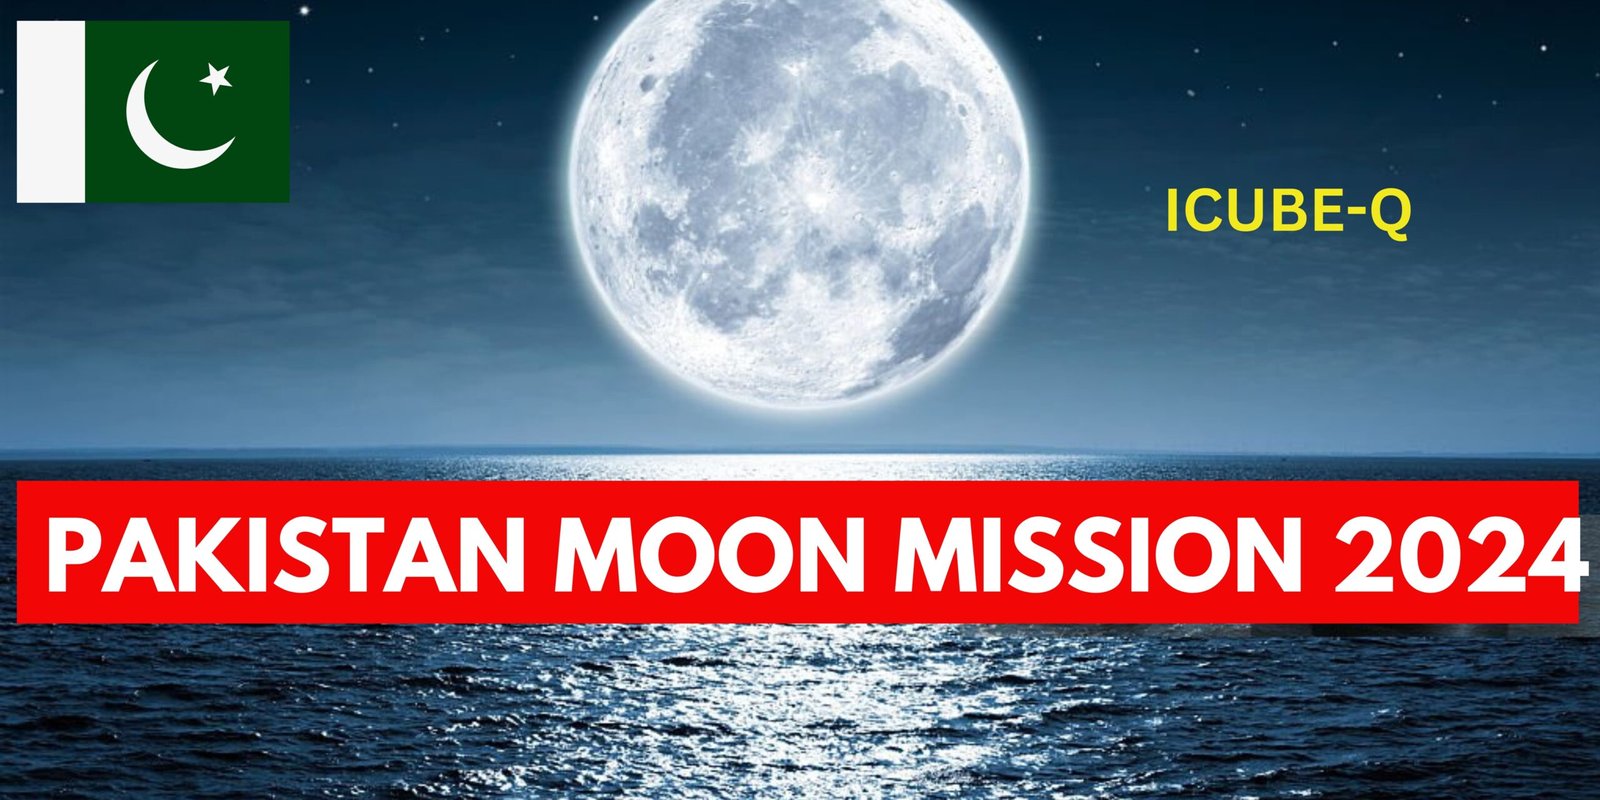 Pakistan’s Historic Moon Mission: A Giant Leap for the Nation!